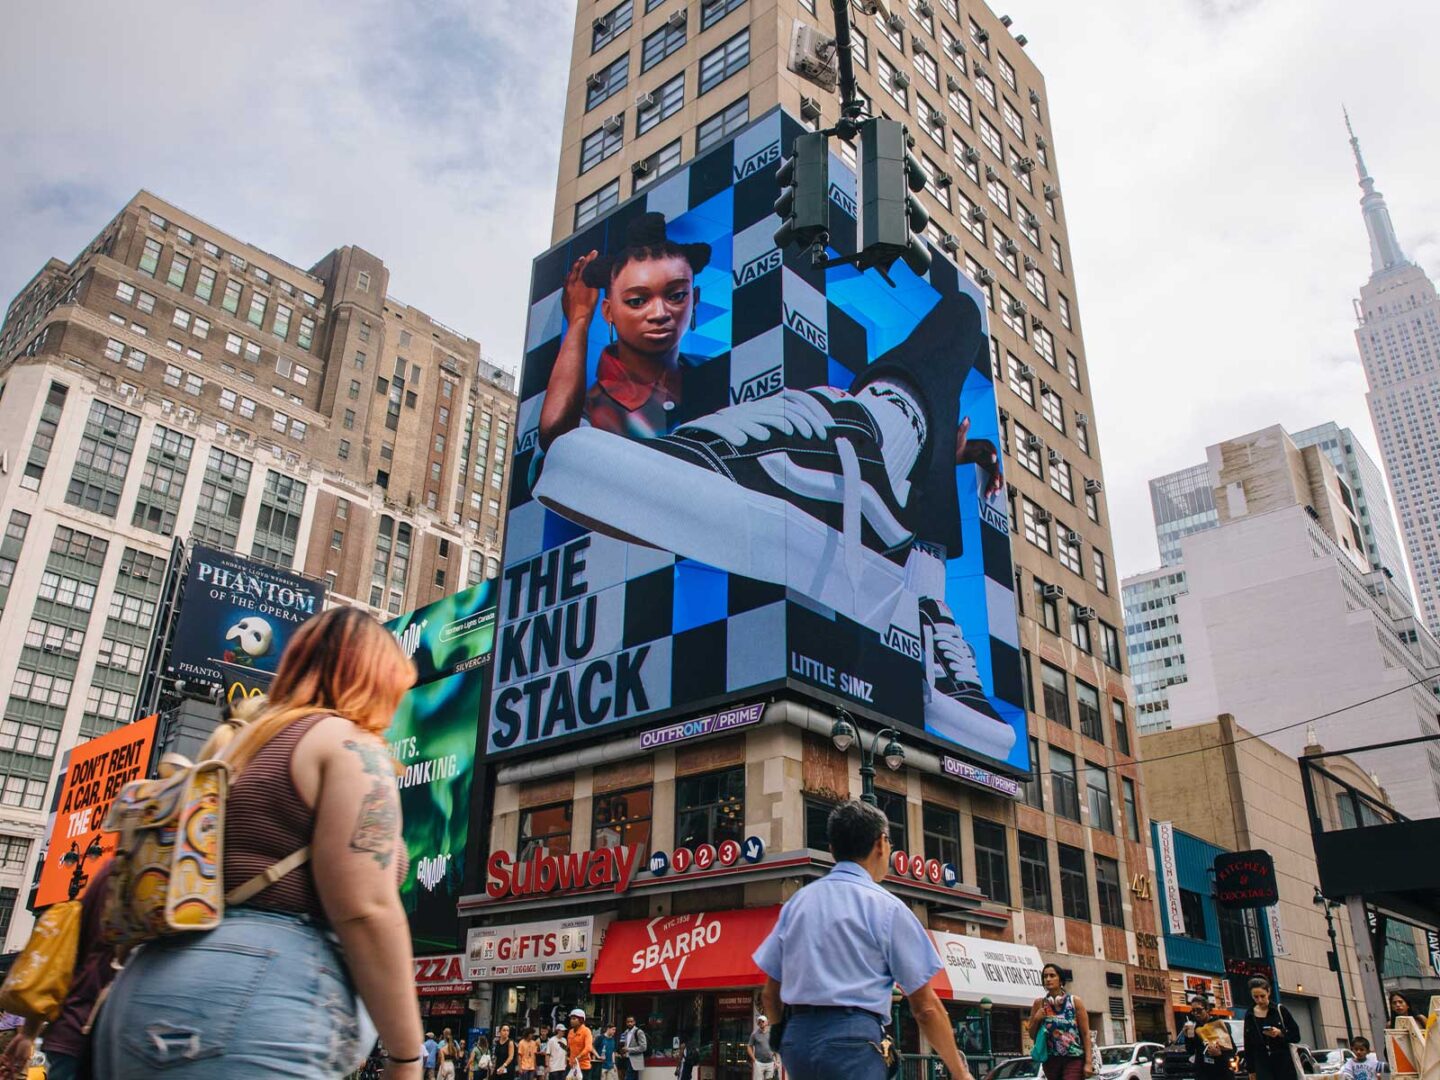 ‘The city that never sleeps’: a trip to New York with Vans